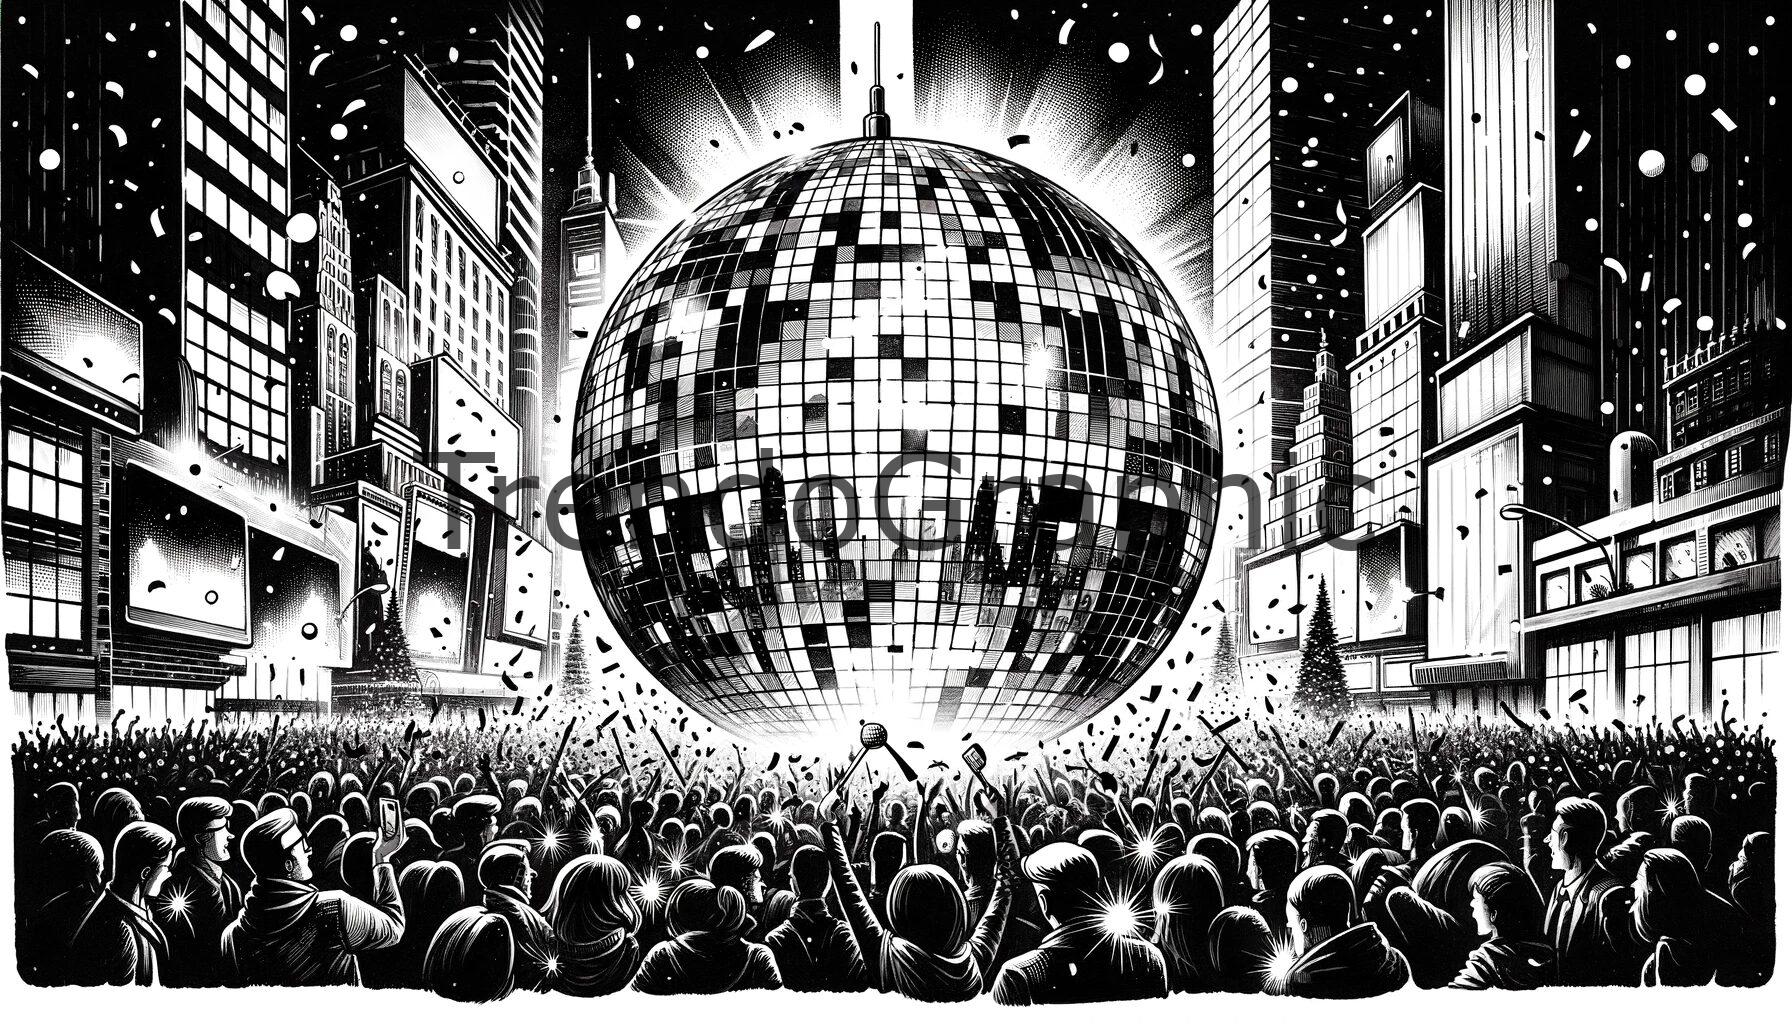 Spectacular New Year’s Eve Disco Ball Extravaganza in Times Square